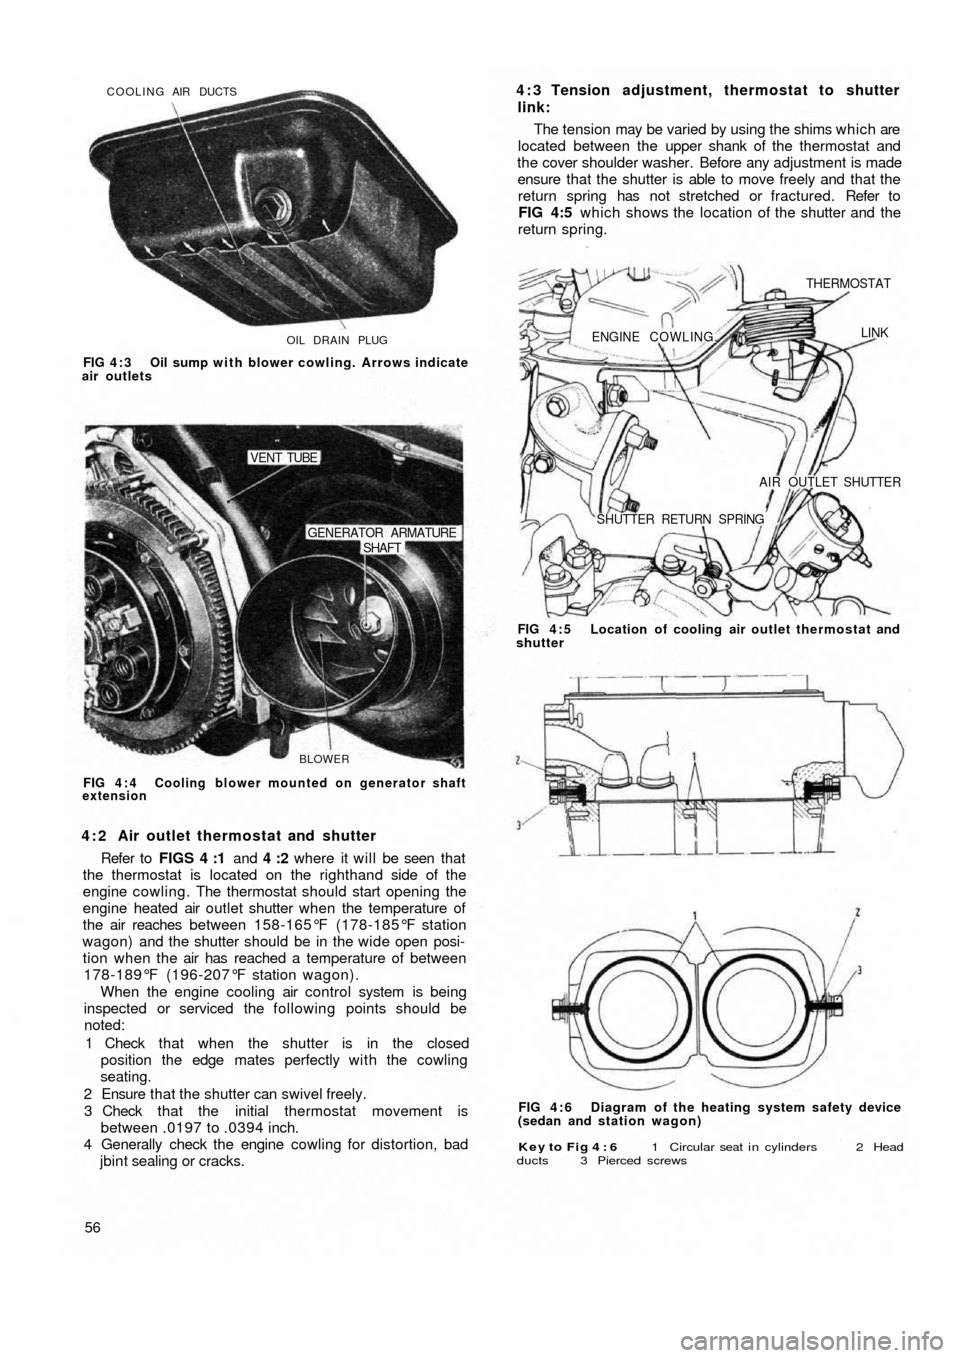 FIAT 500 1959 1.G Workshop Manual OIL DRAIN PLUG COOLING AIR DUCTS
FIG 4 : 3  Oil sump with blower cowling. Arrows indicate
air outlets
BLOWER
SHAFT GENERATOR ARMATURE
VENT TUBE
FIG 4 : 4  Cooling blower mounted on generator shaft
ext